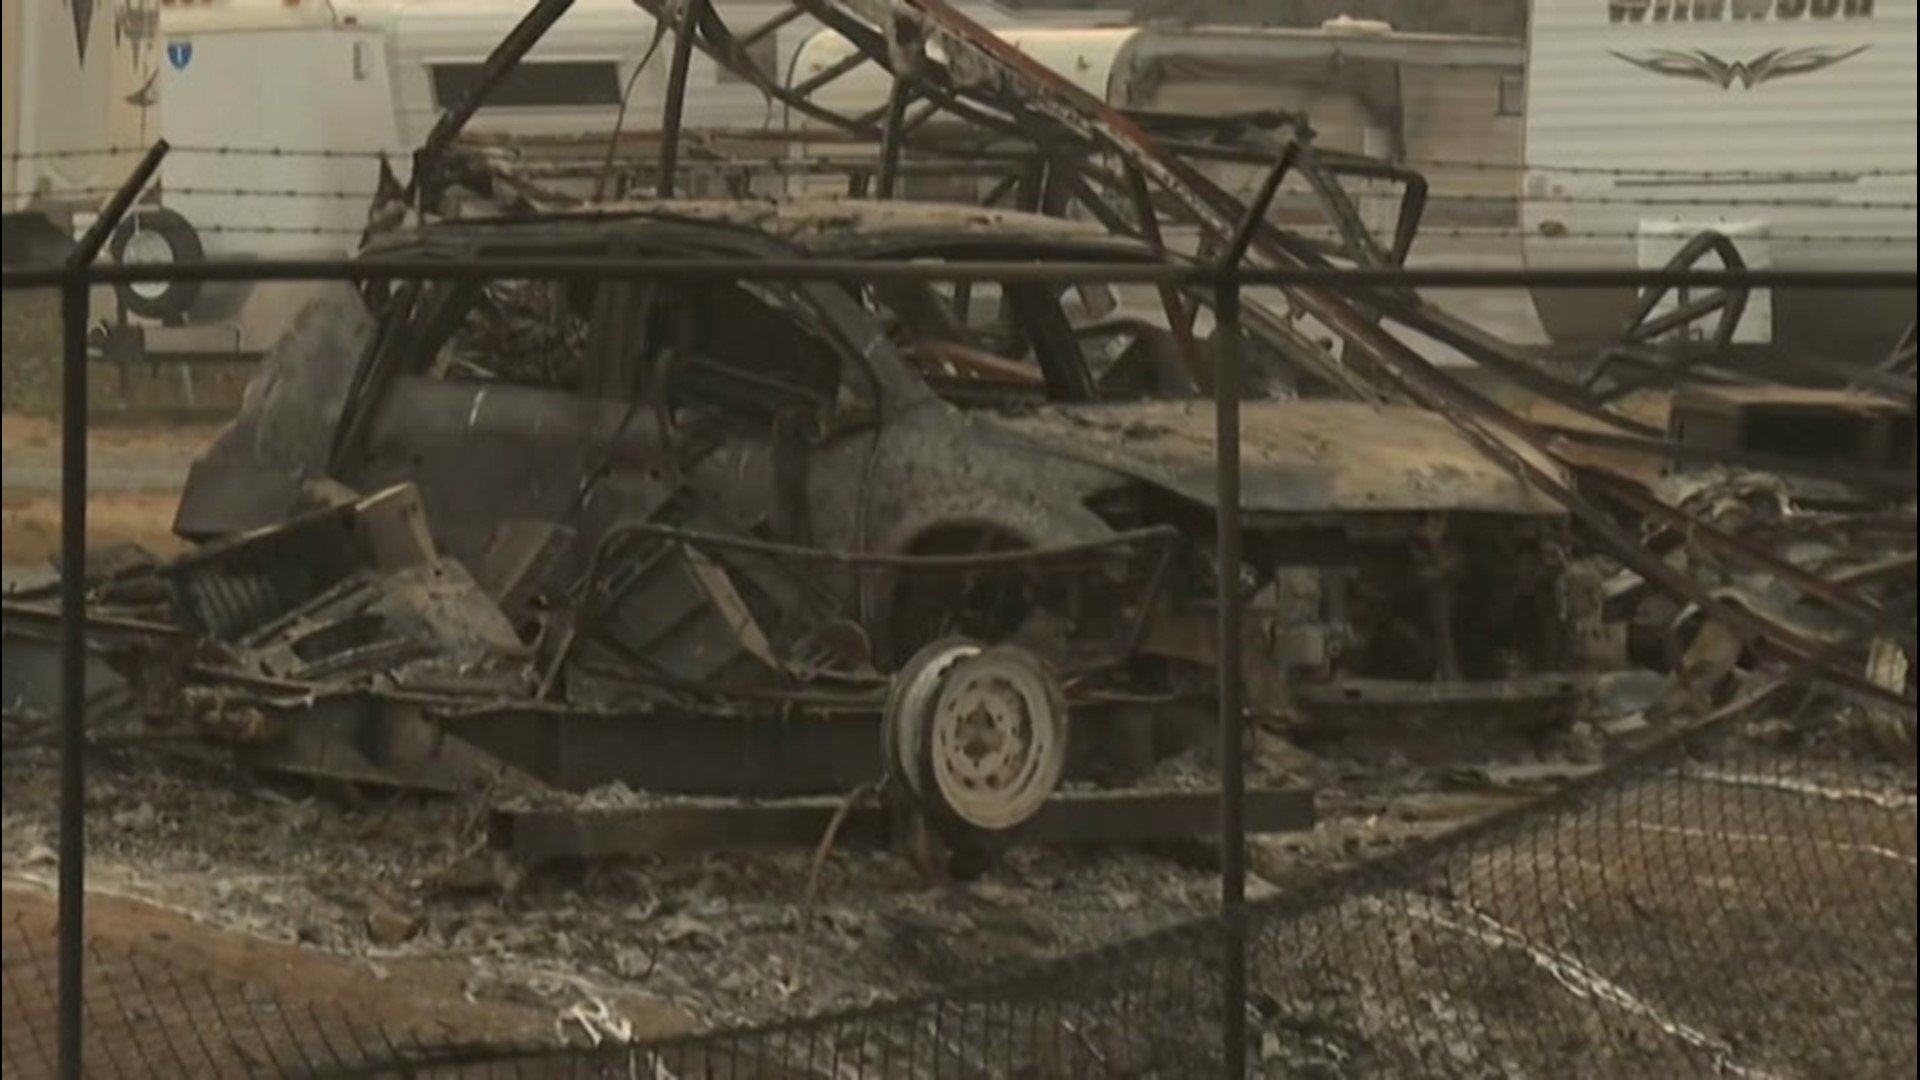 Video shot from a car on Sept. 15 shows the destruction left behind in Talent, Oregon, after the Amelda Fire scorched through the town earlier this month.